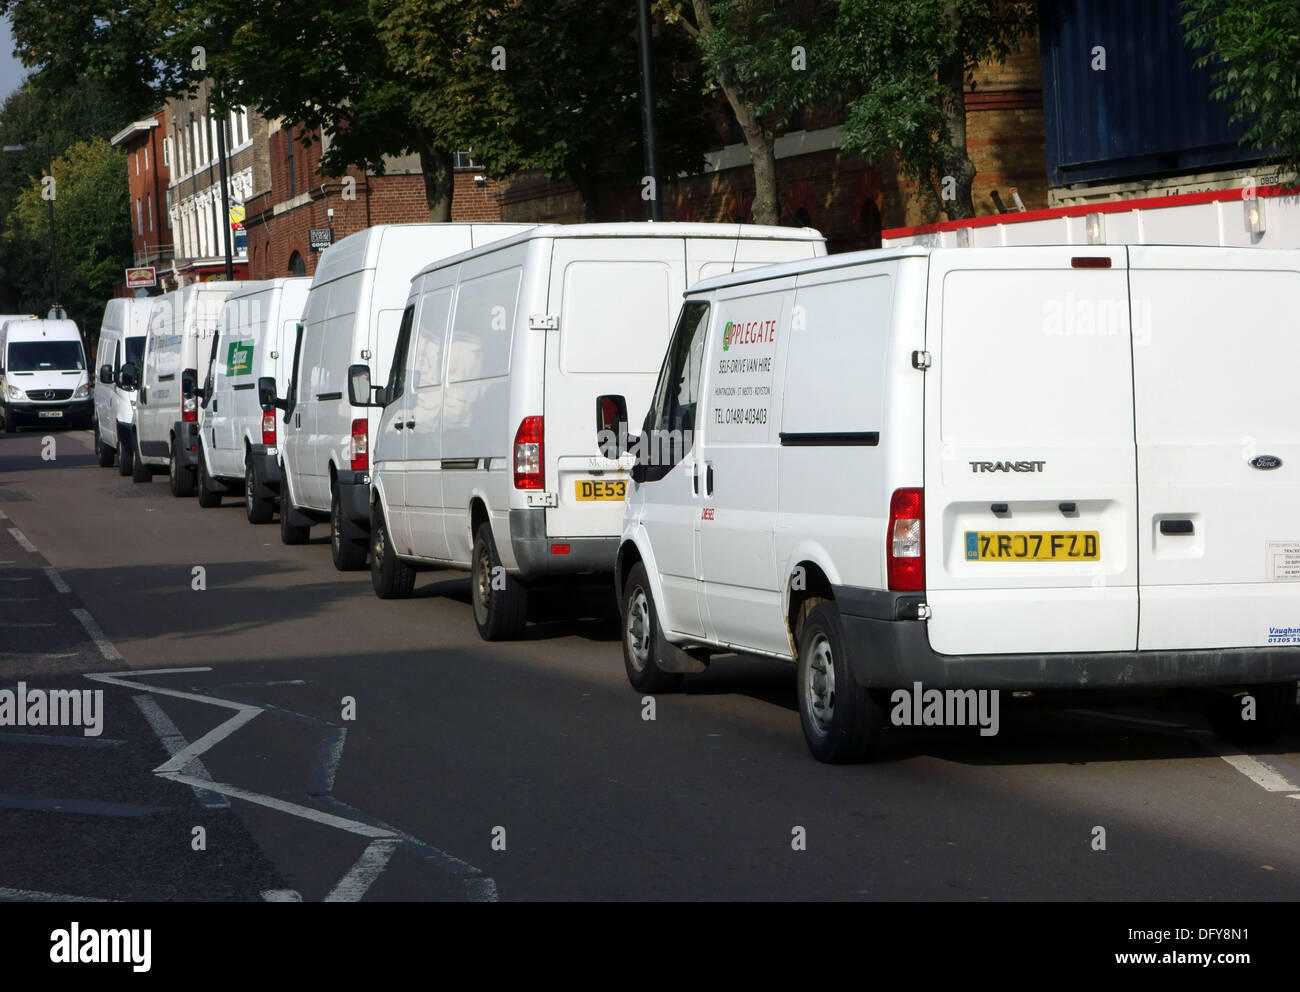 Row of white vans parked in London street Stock Photo - Alamy